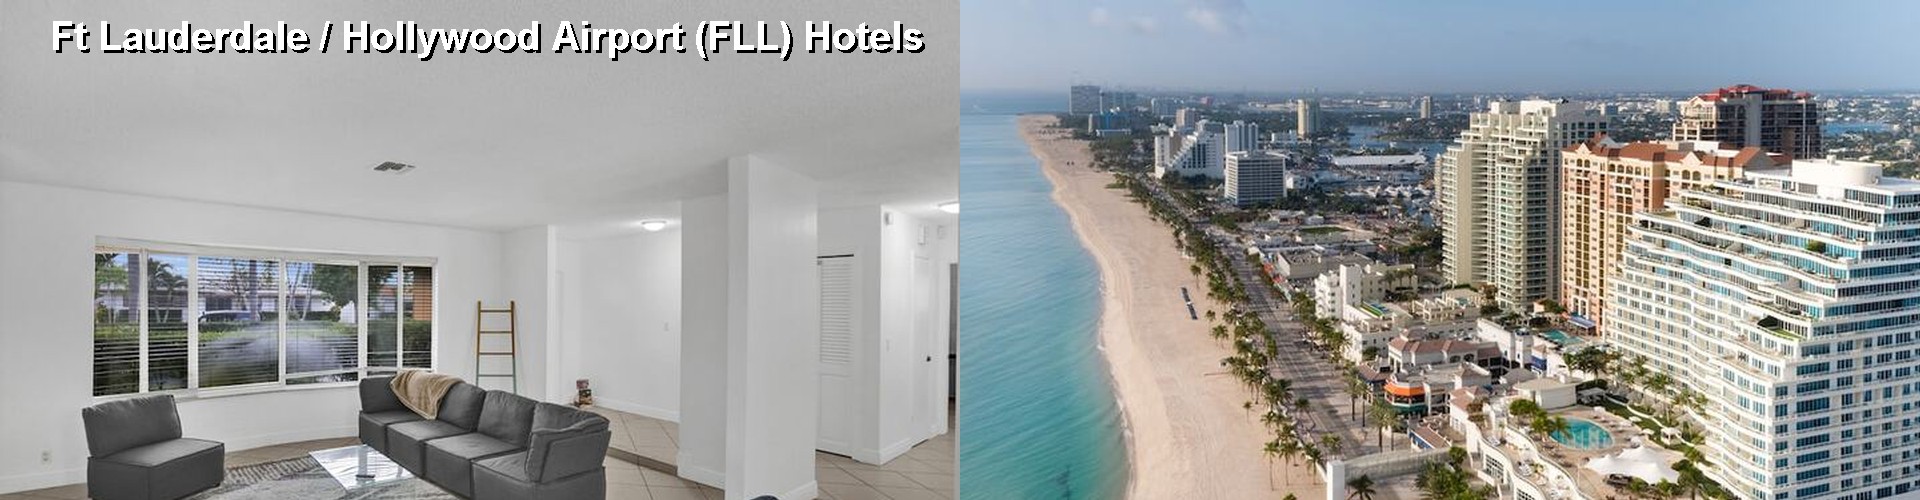 5 Best Hotels near Ft Lauderdale / Hollywood Airport (FLL)